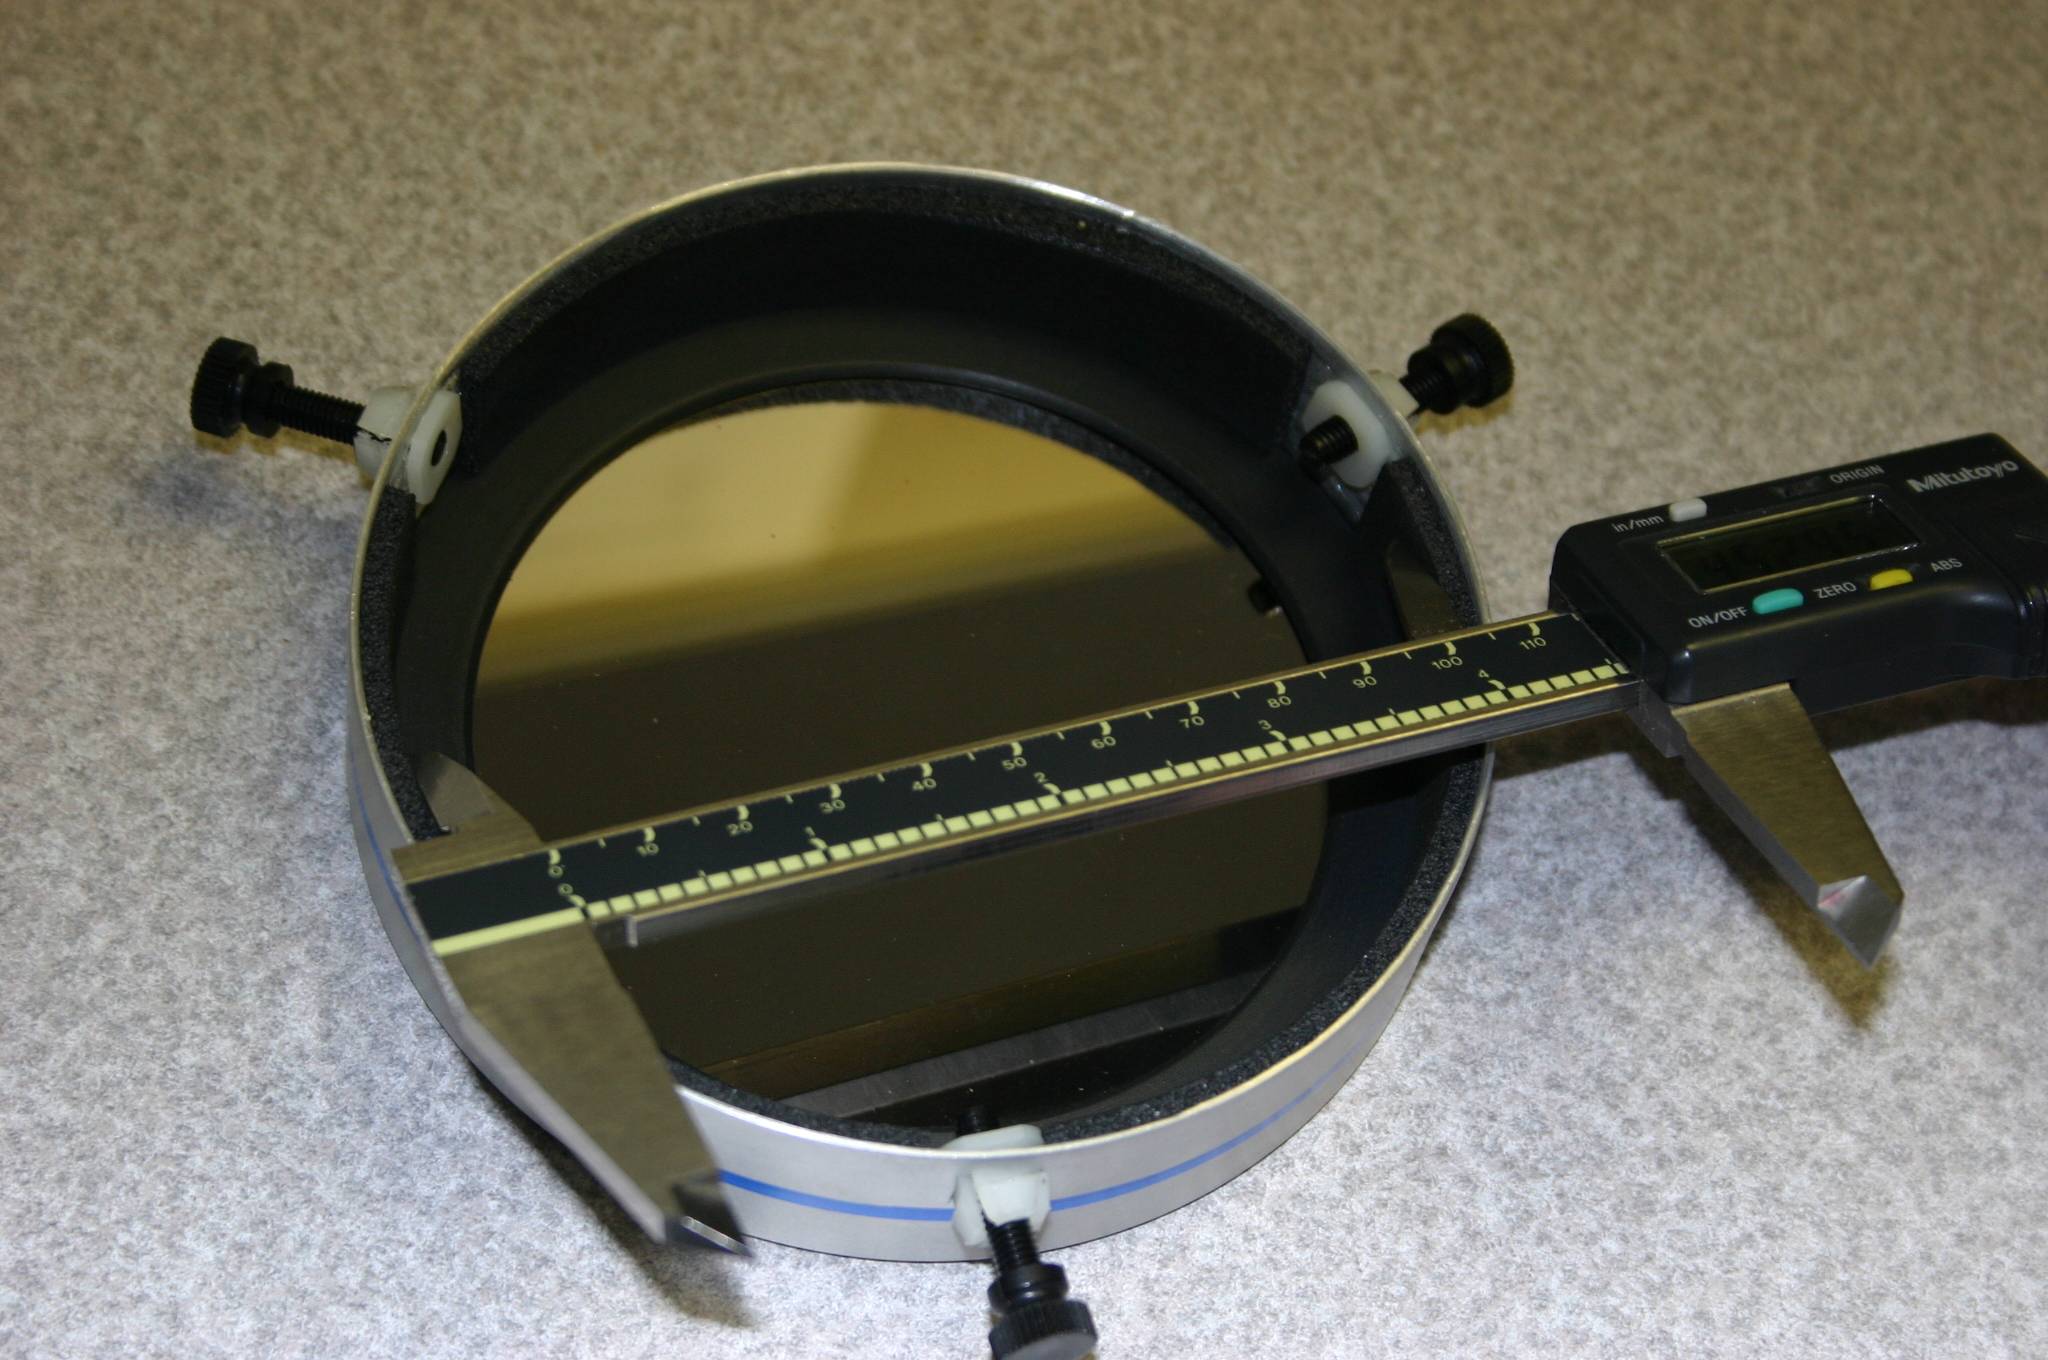 Solar filter sizes refer to the inner diameter of the filter's foam-lined metal cell